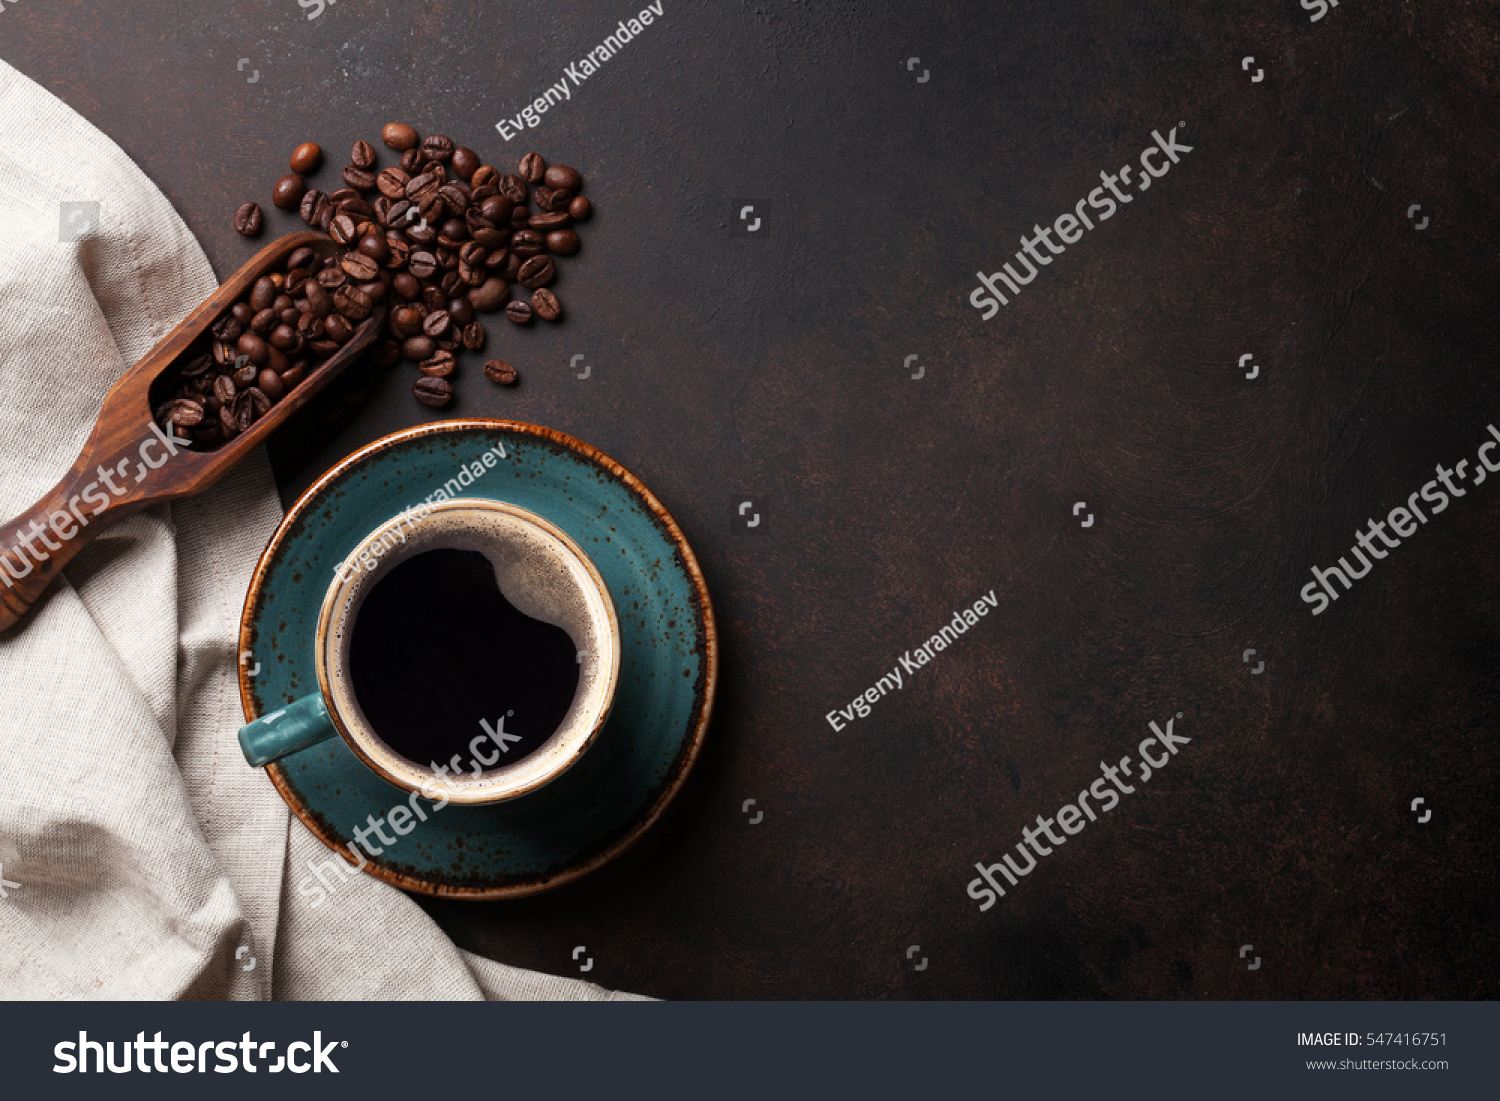 Coffee cup and beans on old kitchen table. Top view with copyspace for your text #547416751